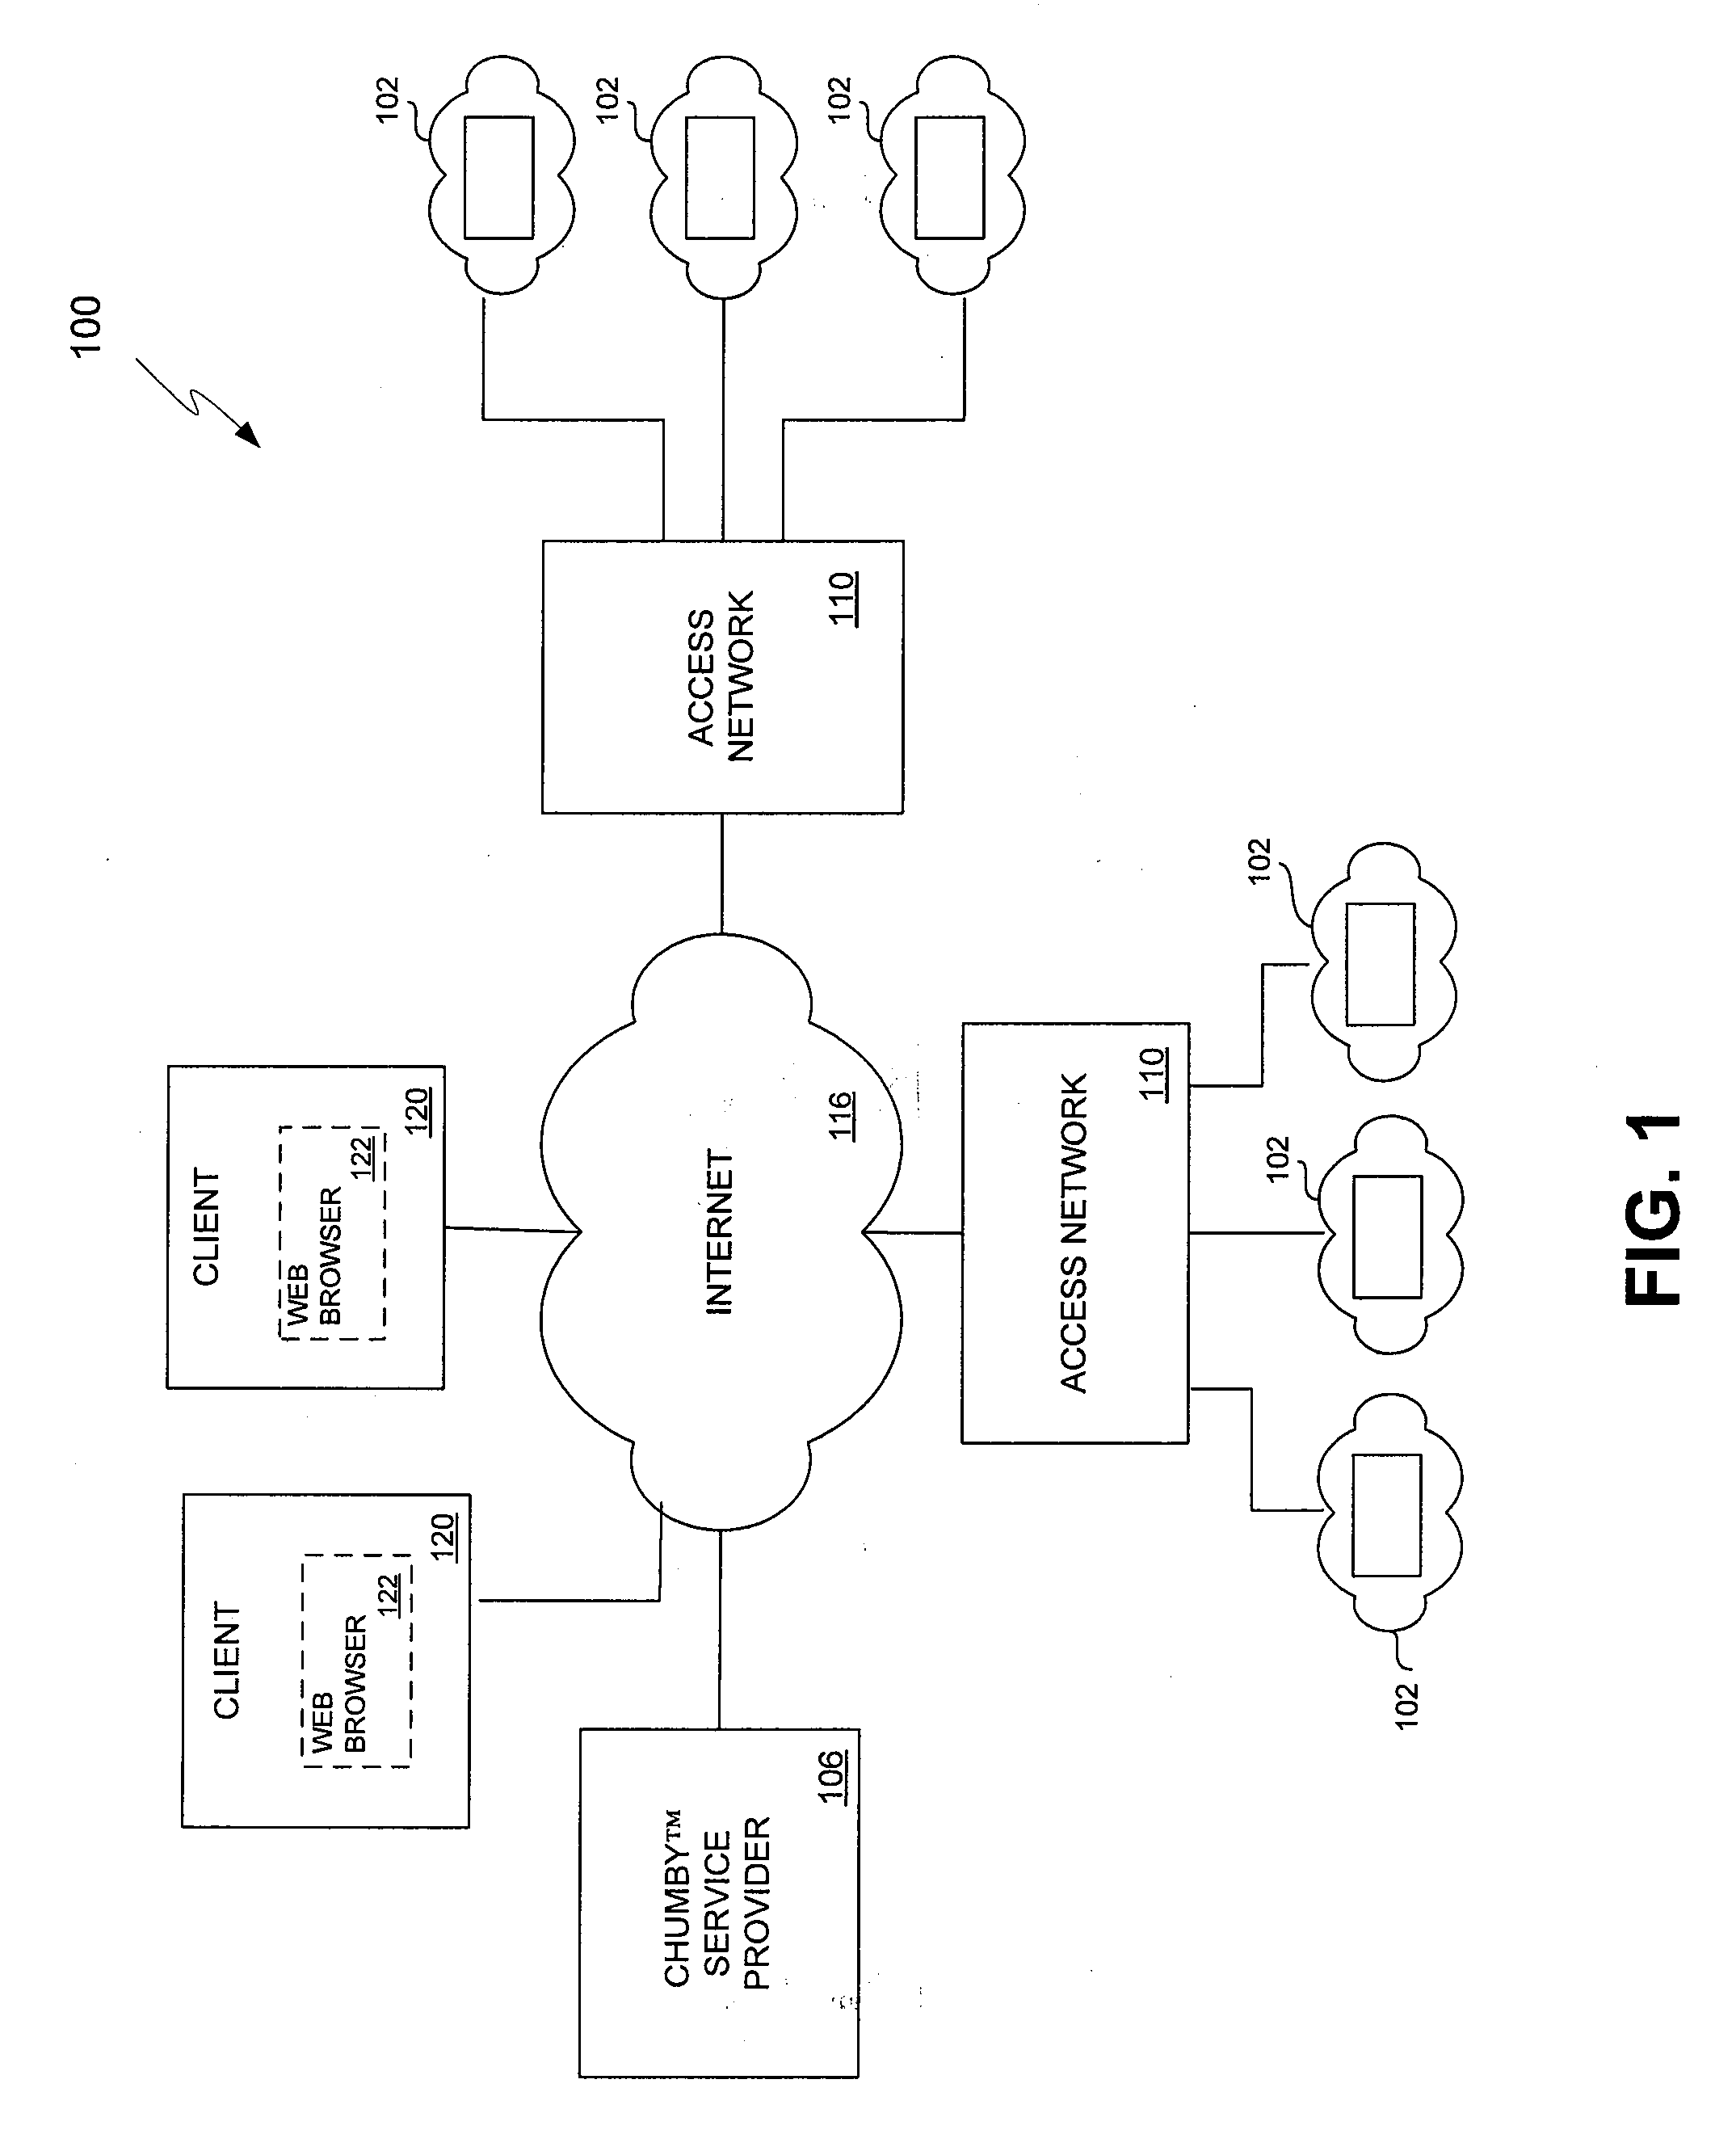 Systems and methods for alarm tone selection, distribution, and playback in a networked audiovisual device